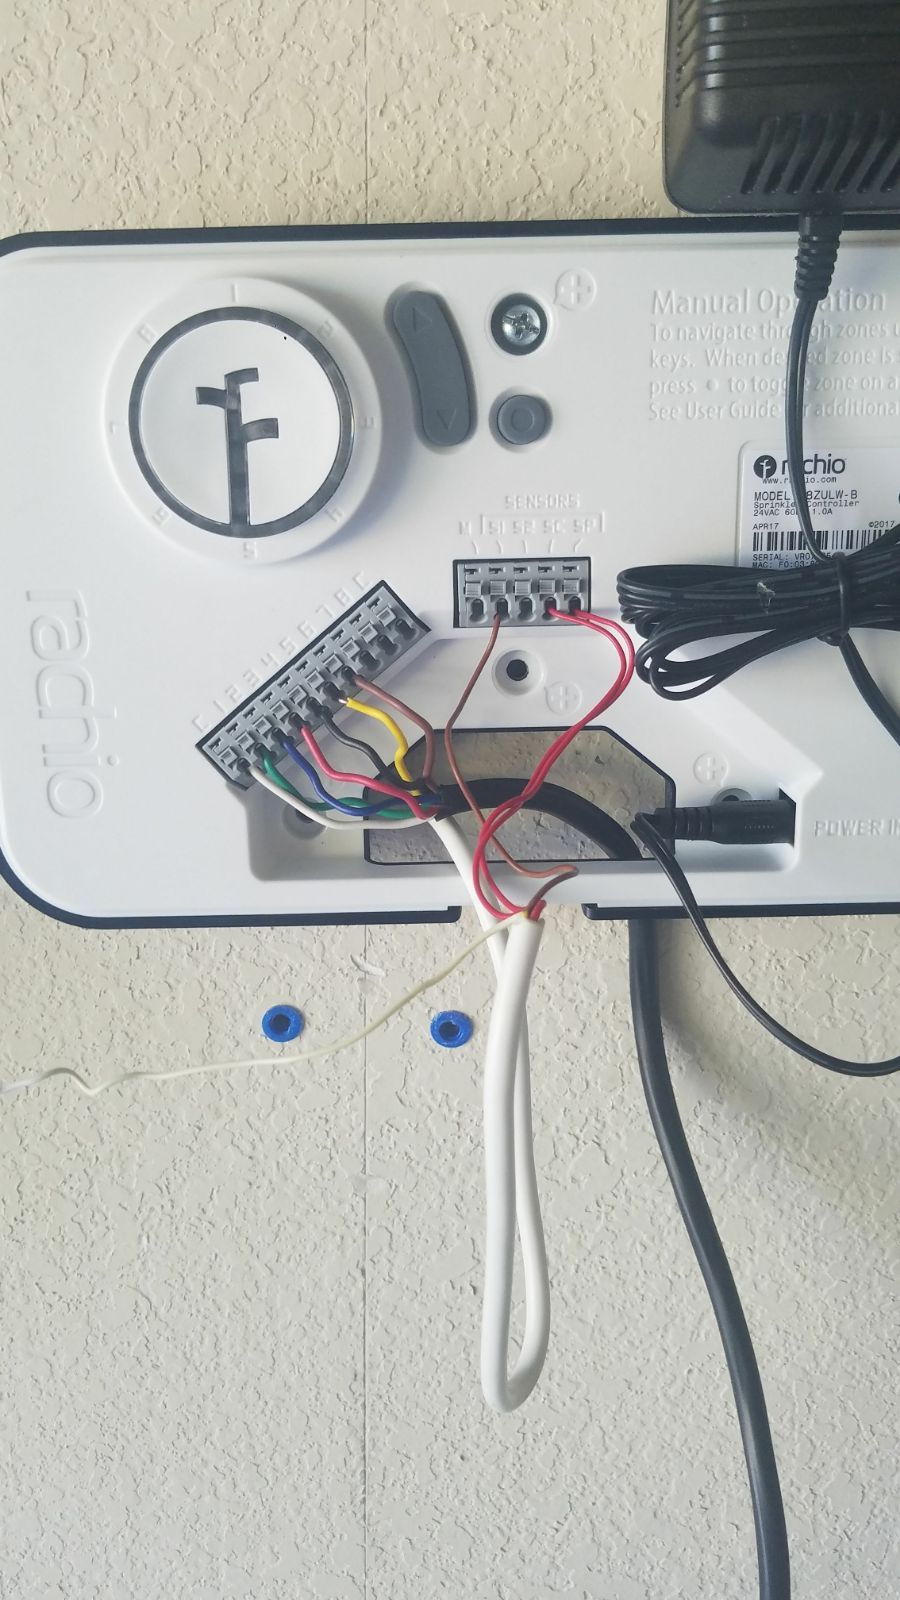 Wiring Issue - Archive - Rachio Community